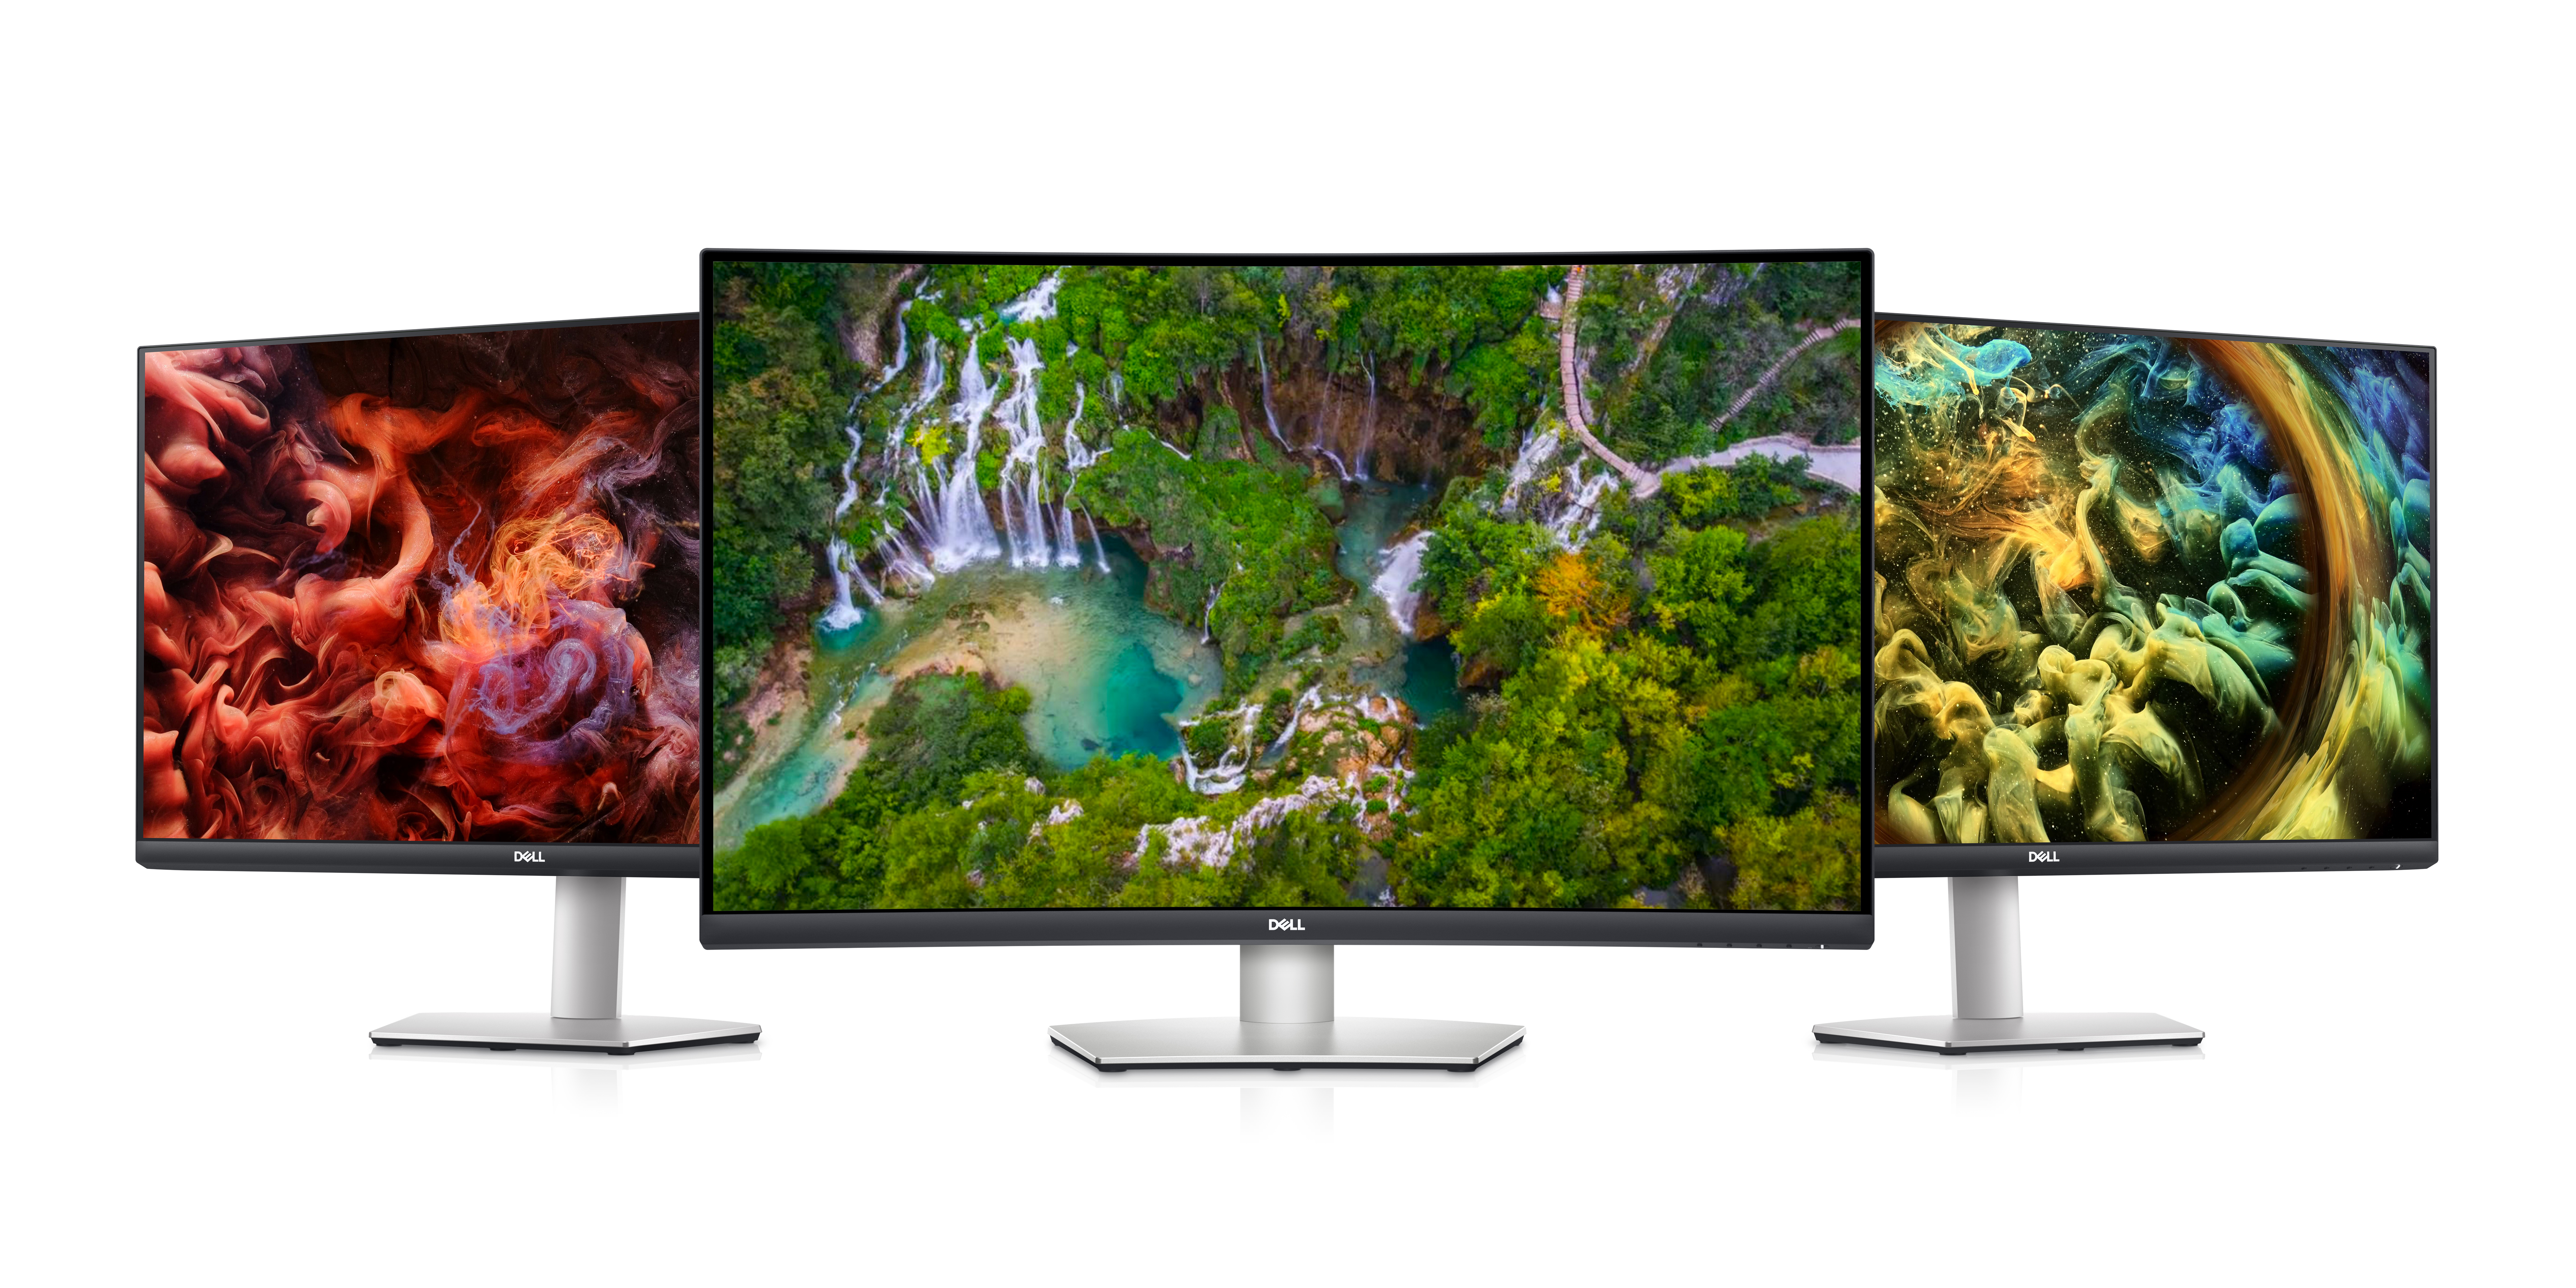 Dell introduces new monitors in its S-series lineup tailored for 